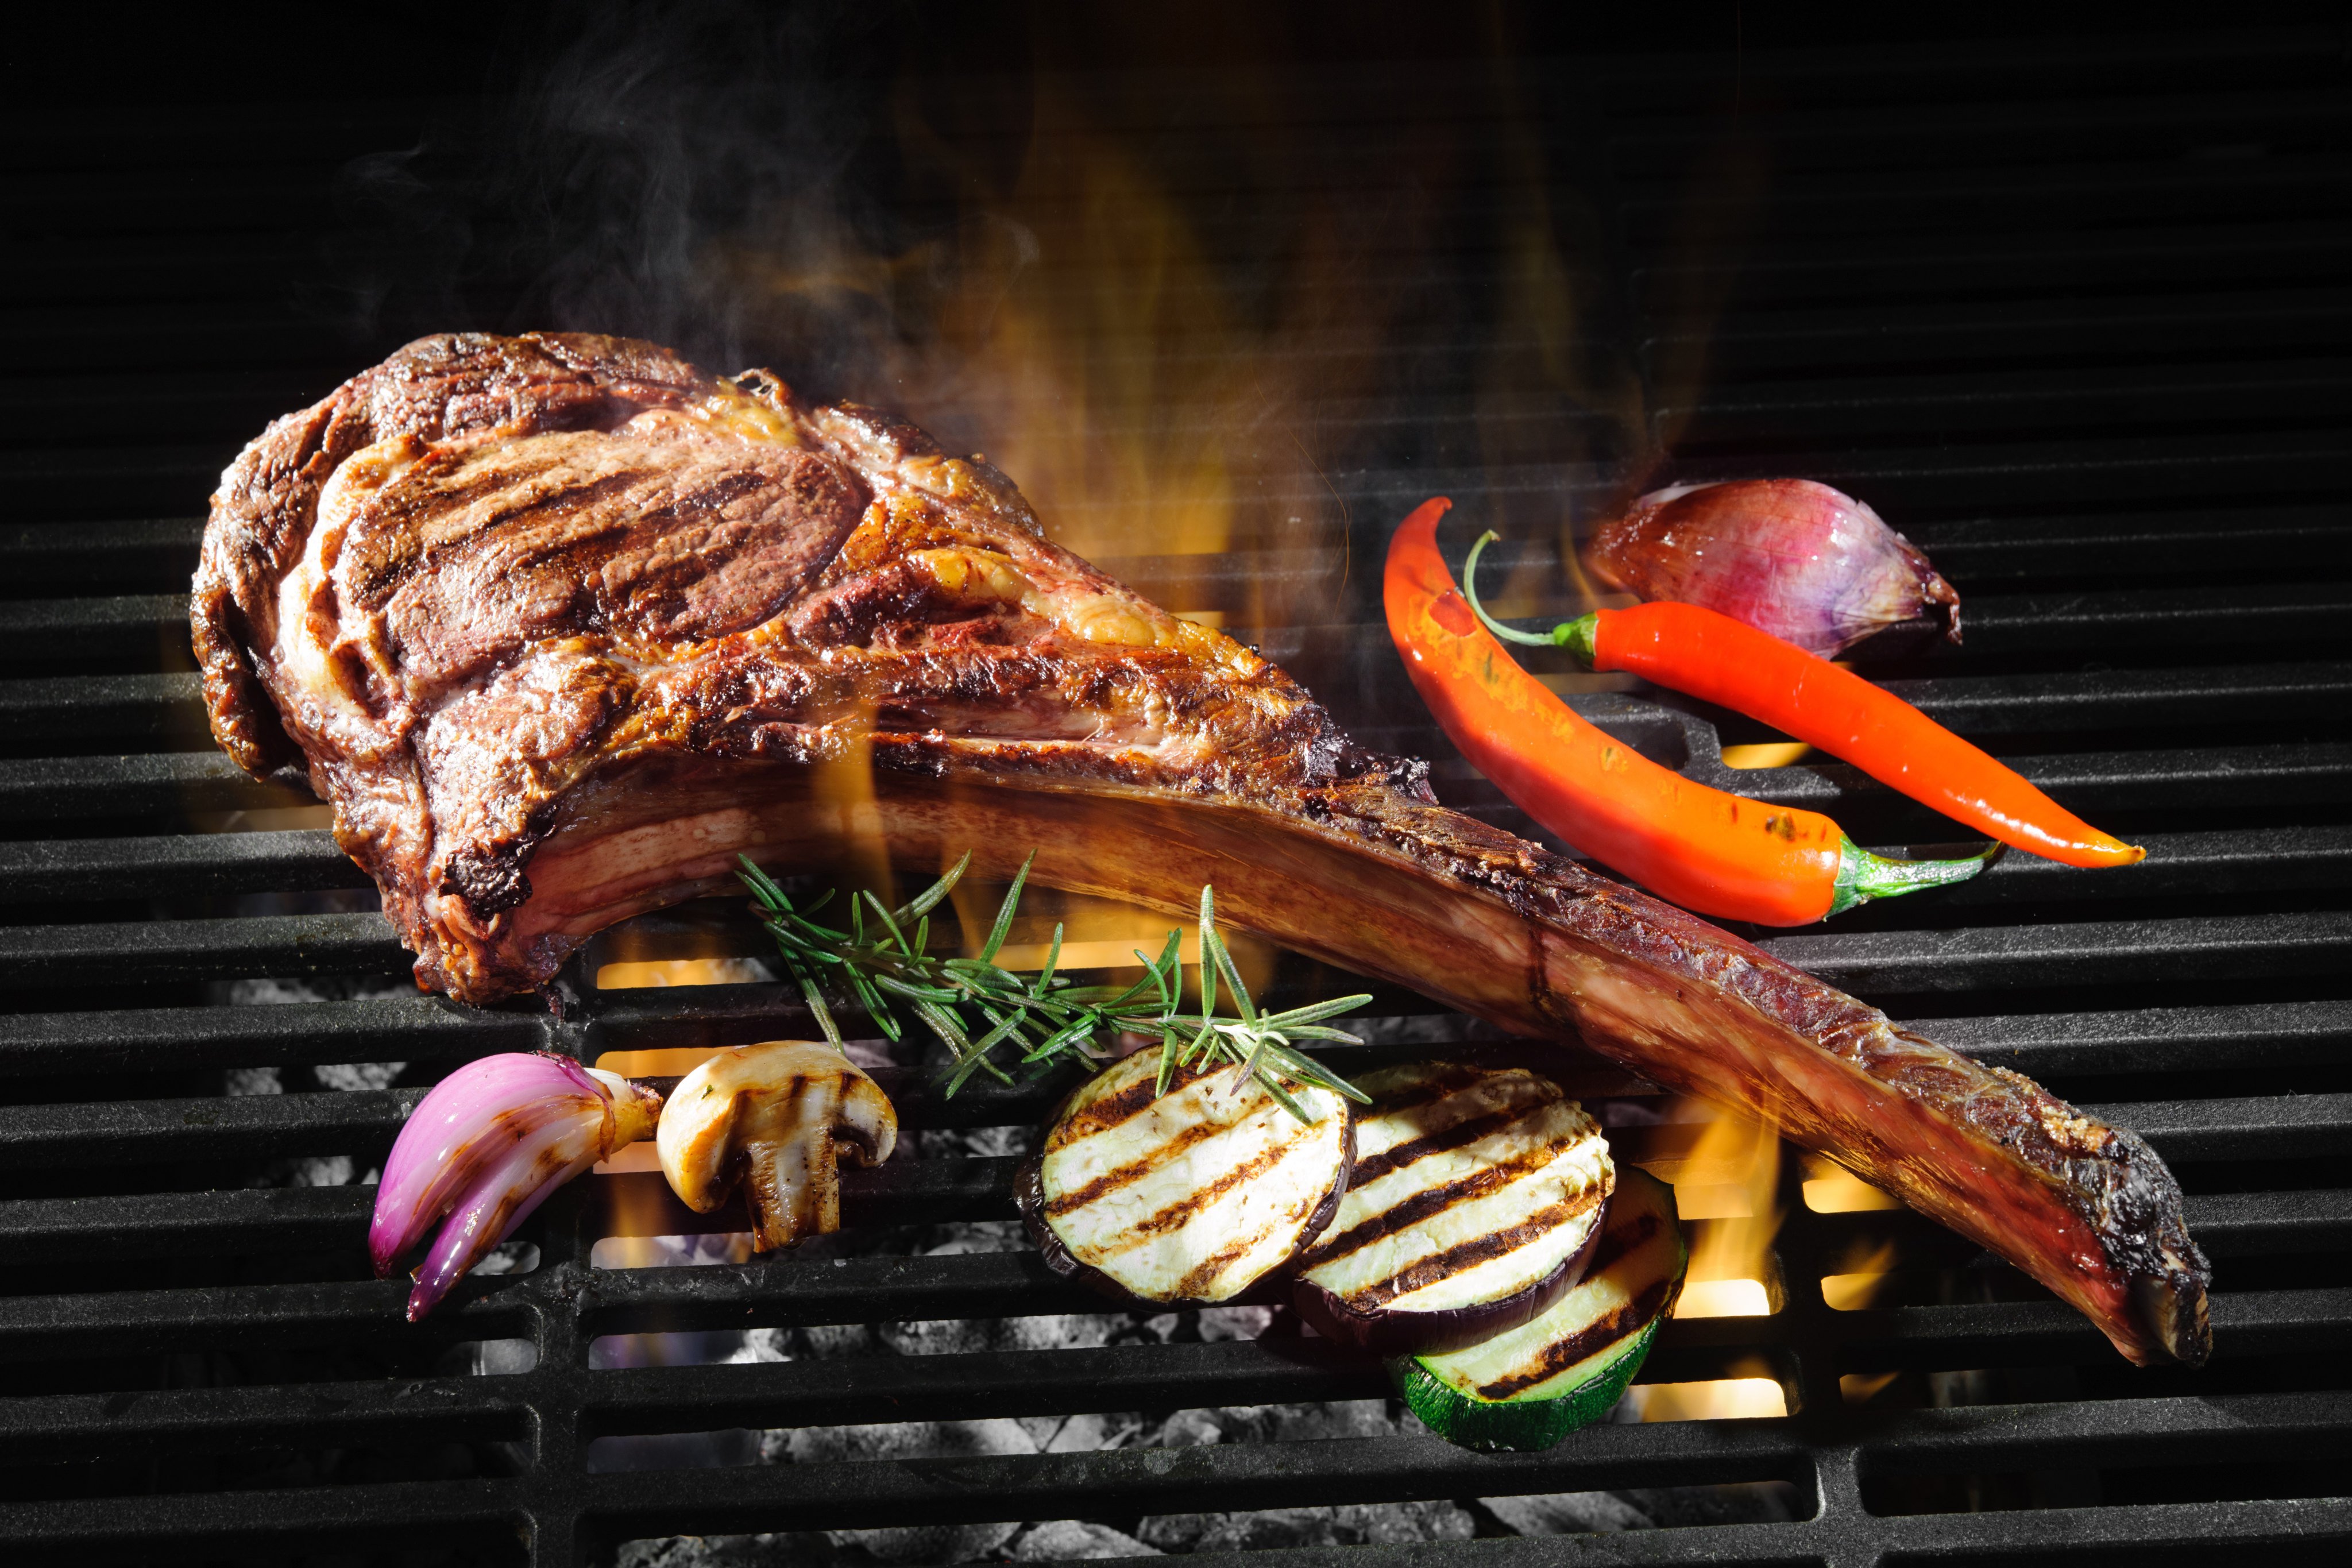 Tomahawk steaks are an overpriced gimmick that need taking off menus. Photo: Shutterstock